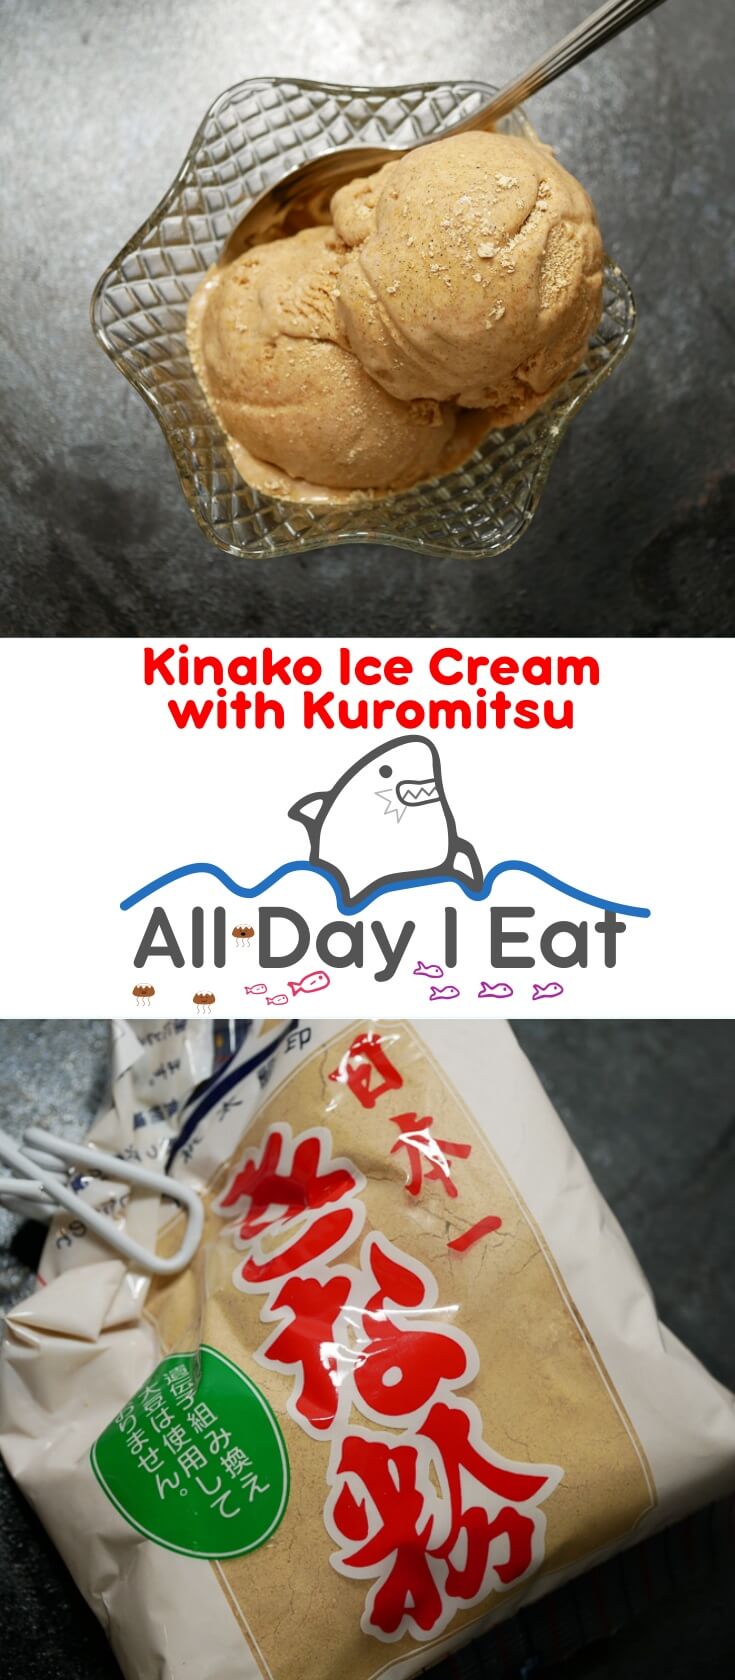 Kinako Ice Cream with Kuromitsu is an earthy ice cream sweetened with Okinawan black sugar syrup. The base flavor of this ice cream is made of kinako (roasted soy bean flour) that not only deepens the flavor, but also adds a dense body to each bite. This is one ice cream that may just teleport your taste buds straight through heavens golden doors. Will you follow?